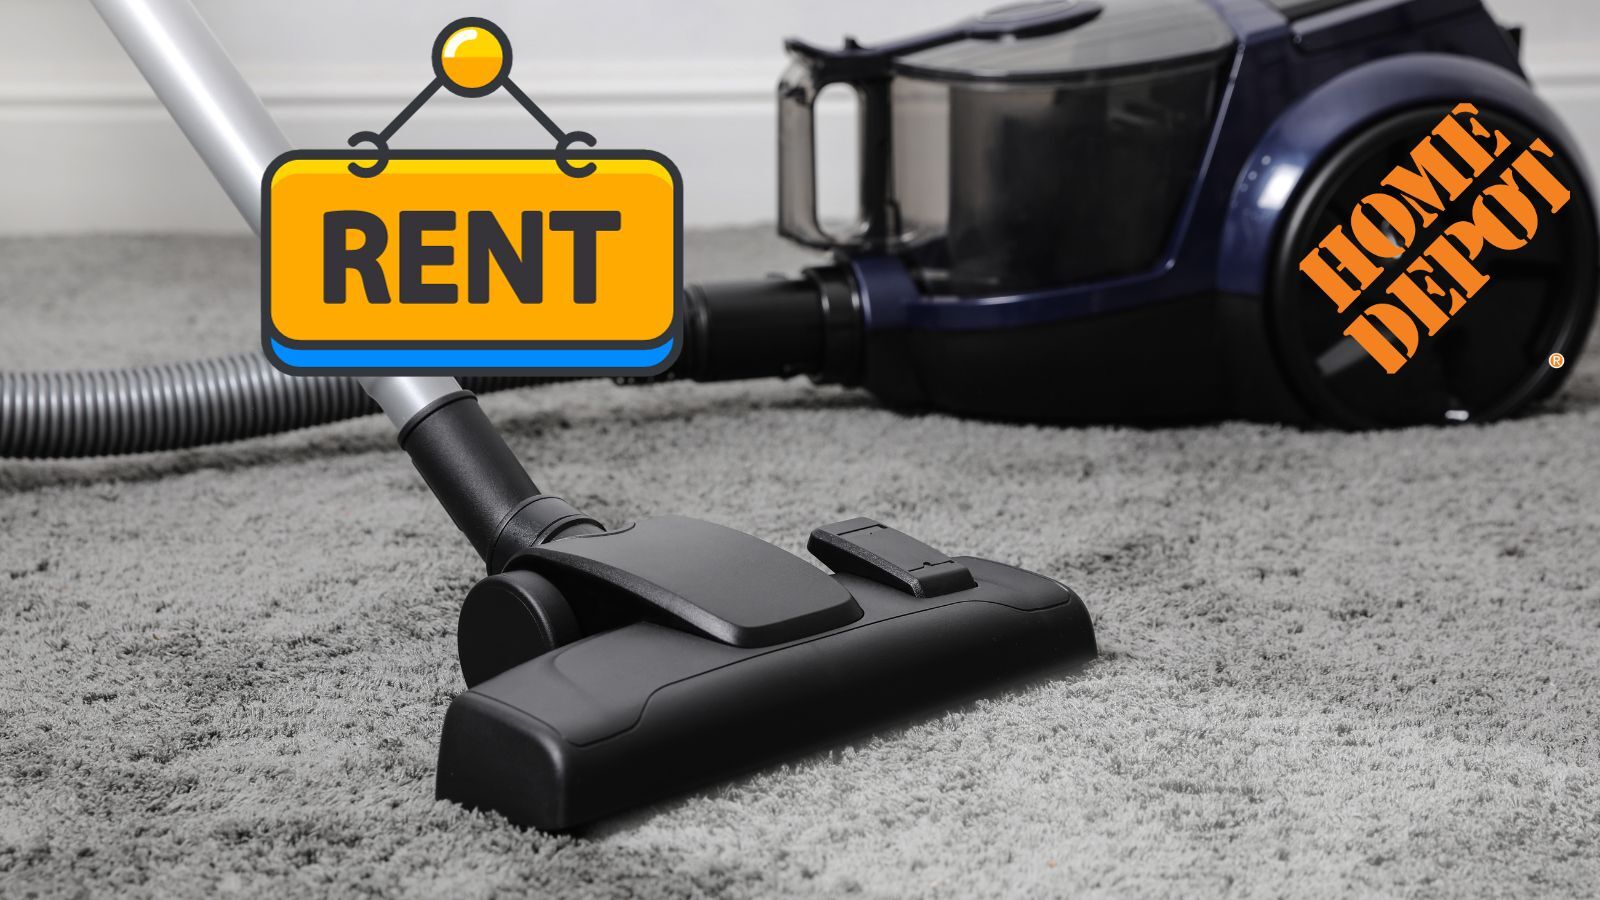 Does Home Depot Rent Carpet Cleaners? (Yes, Here Is the Full Guide) 